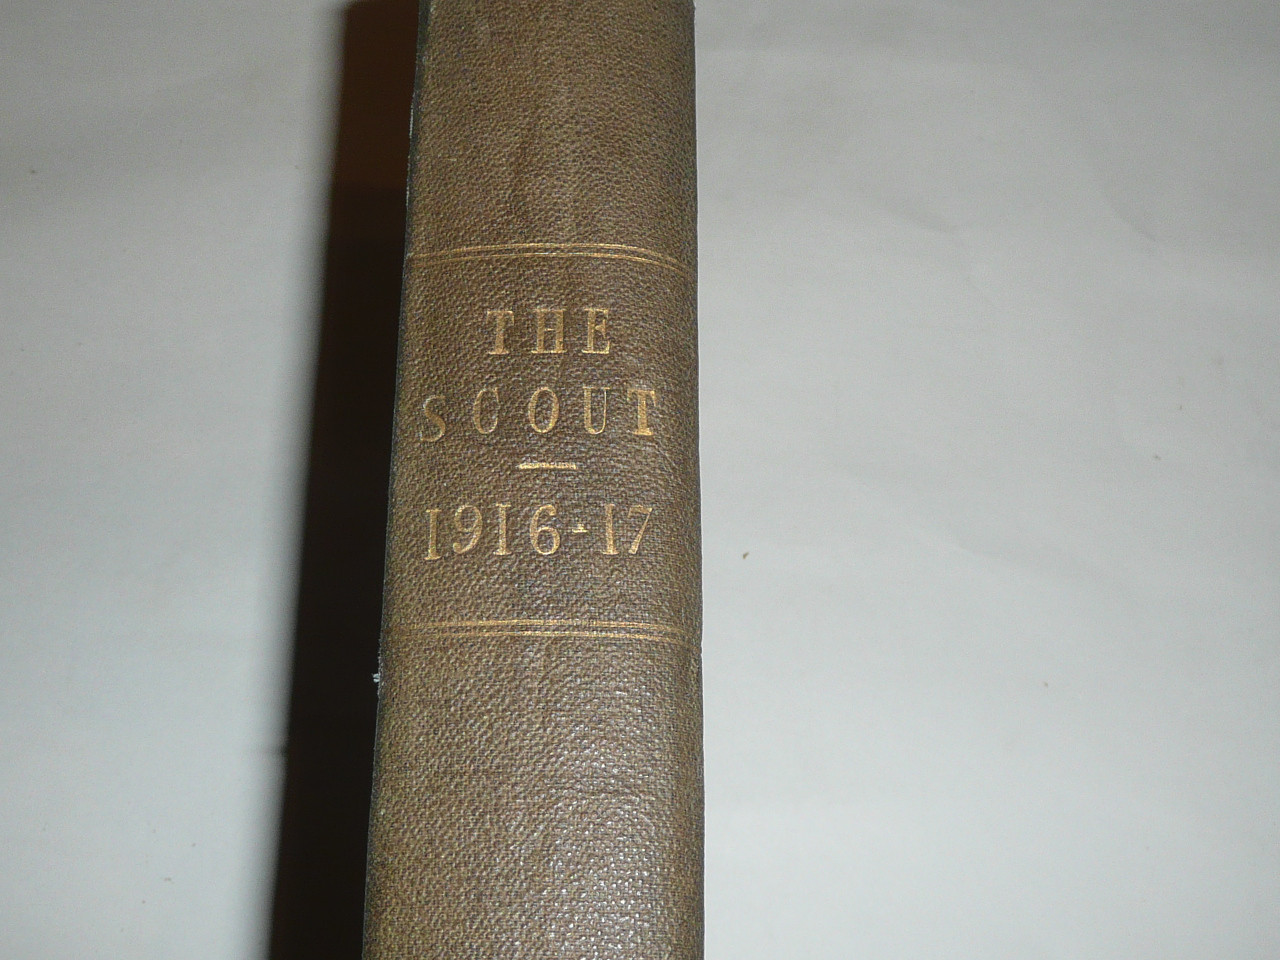 1916-1917 Bound complete volume of "The Scout", United Kingdom Youth Scout Magazine